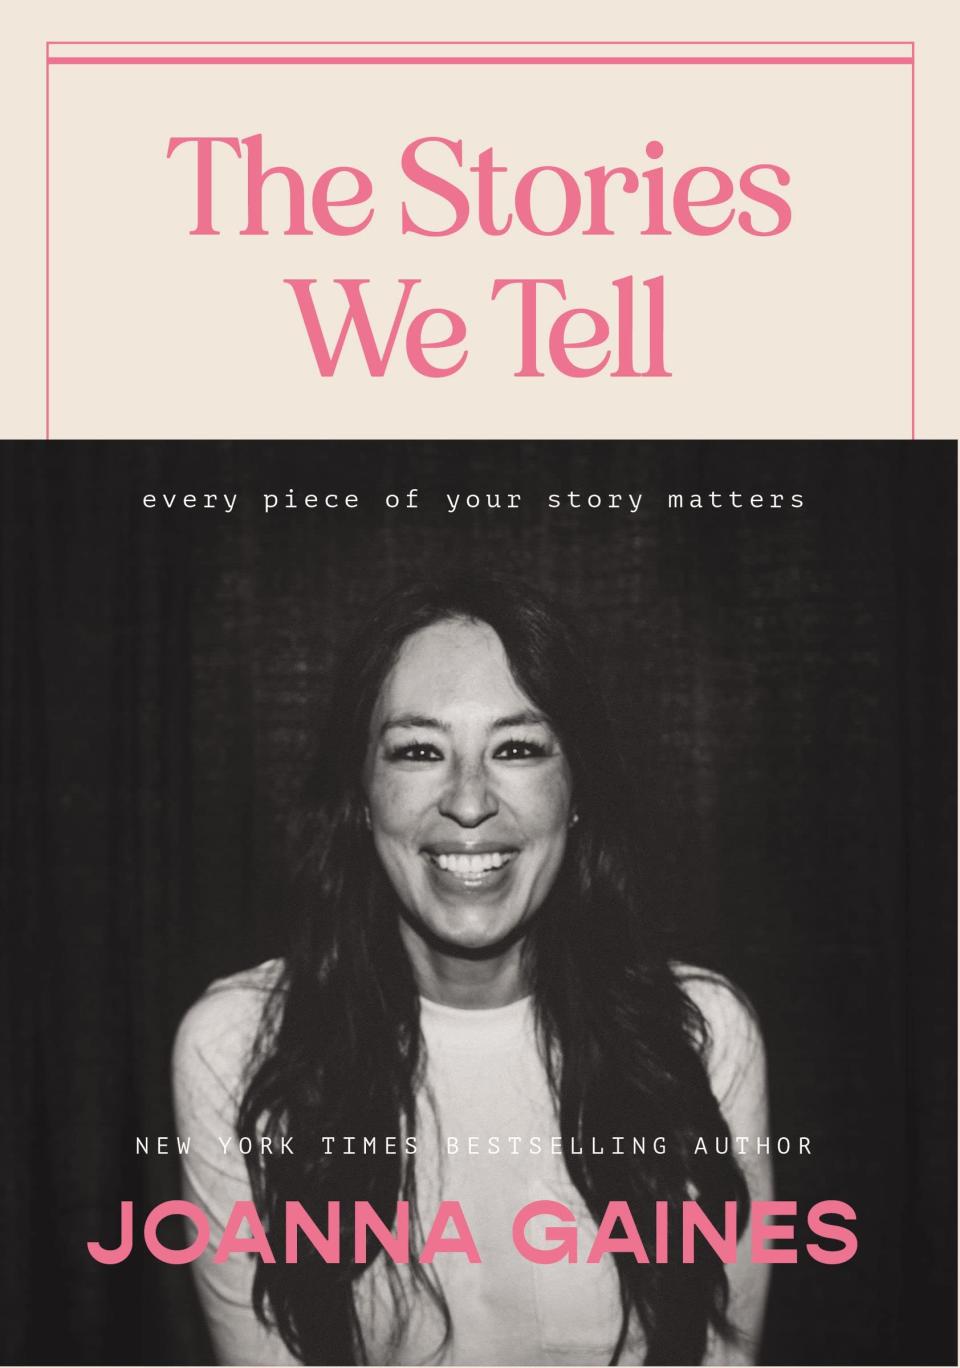 Joanna Gaines' new book is a best seller; Michael Connelly's 'Desert